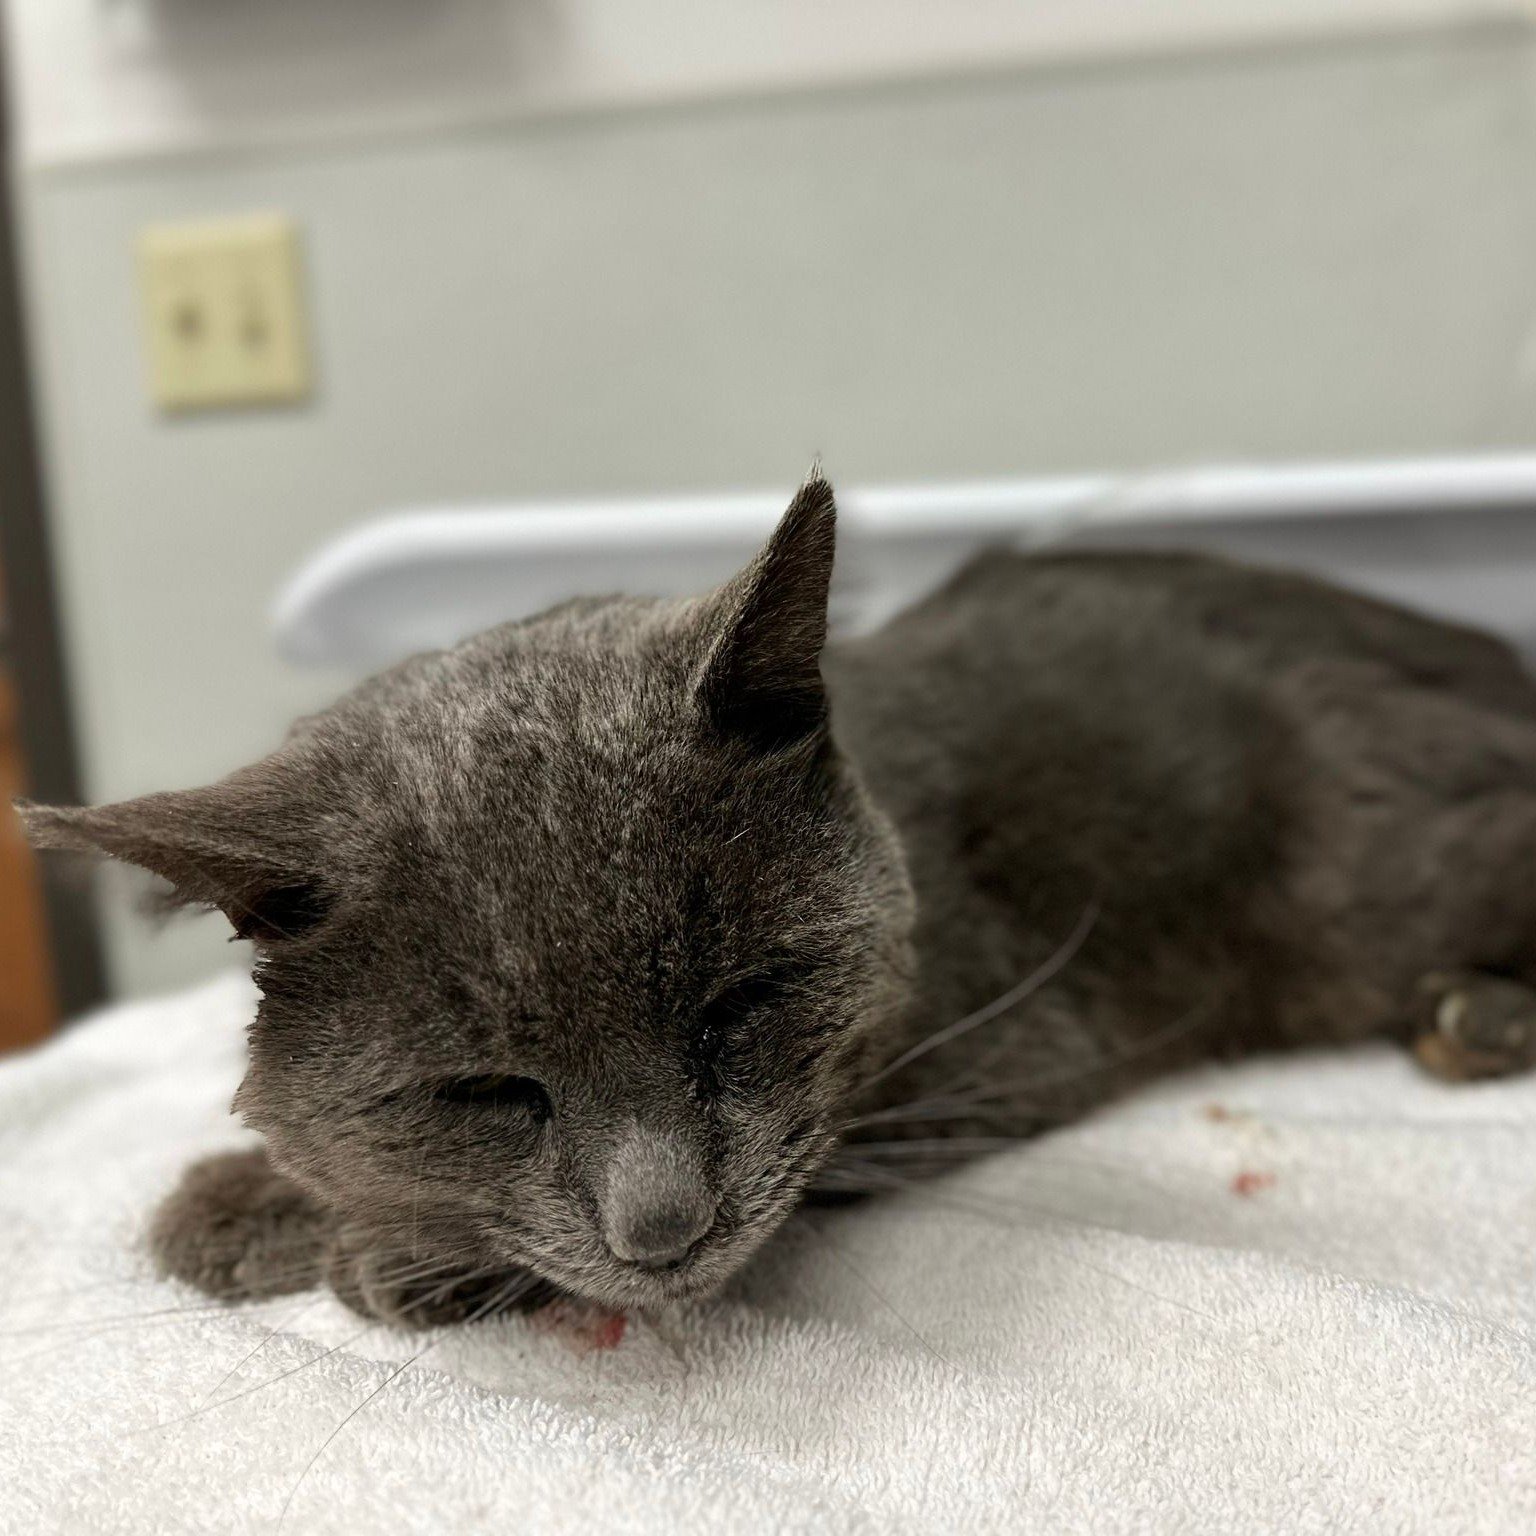 Meet our senior stray cat, Rodger, who recently arrived at Blue Mountain Humane Society in need of urgent care. This 10-year-old feline came in with severely overgrown nails, causing immense discomfort and pain. Our dedicated team immediately sprang 